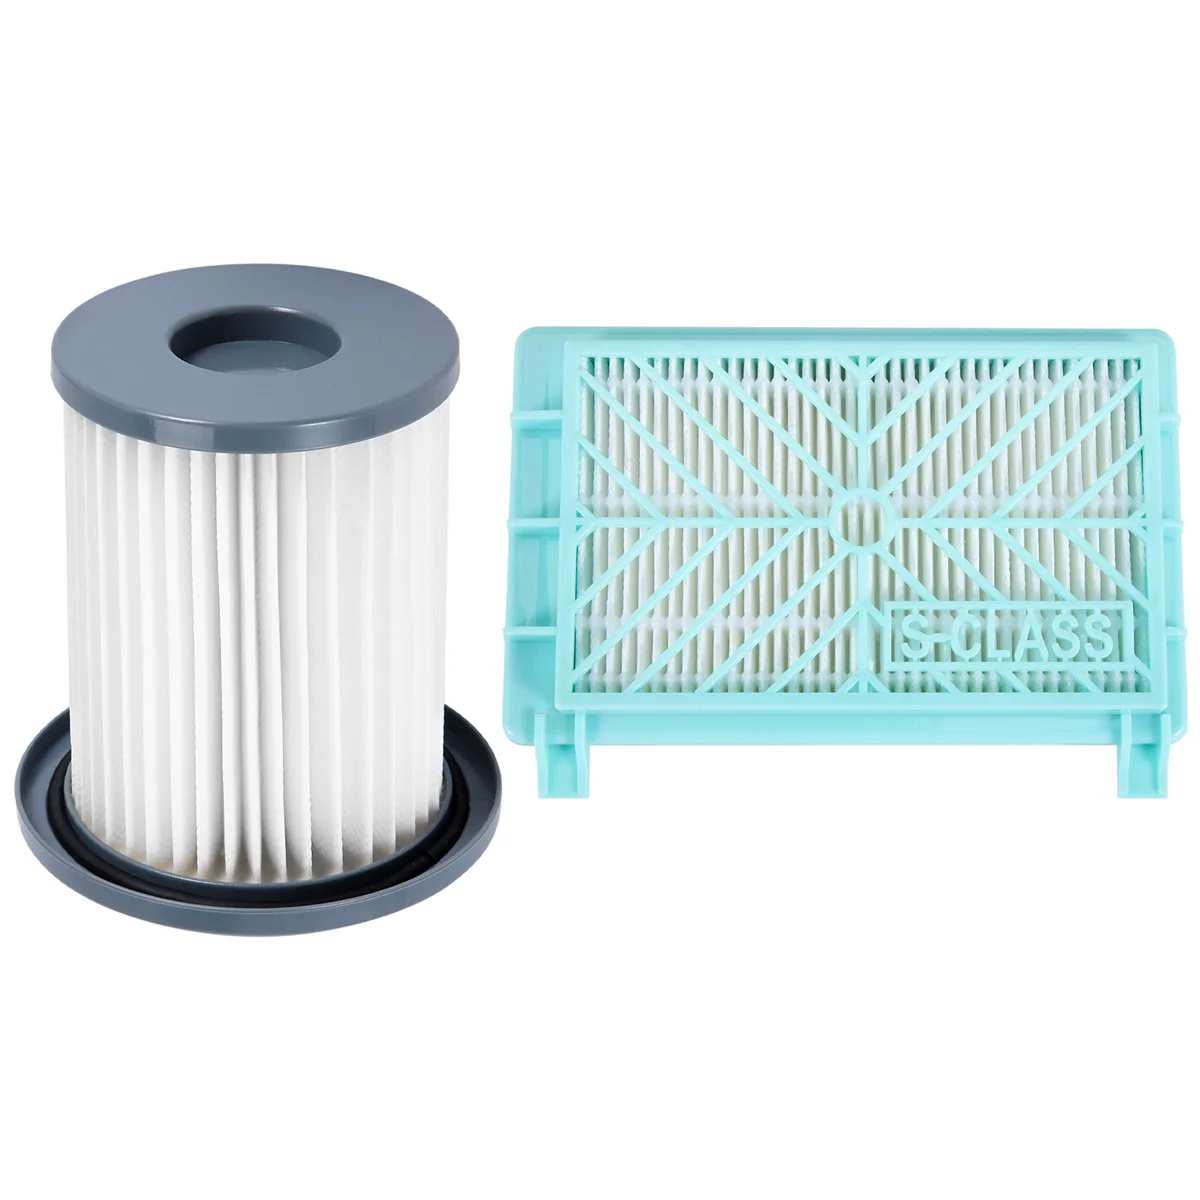 

2pcs High quality Replacement hepa cleaning filter for philips FC8740 FC8732 FC8734 FC8736 FC8738 FC8748 vacuum cleaner filters